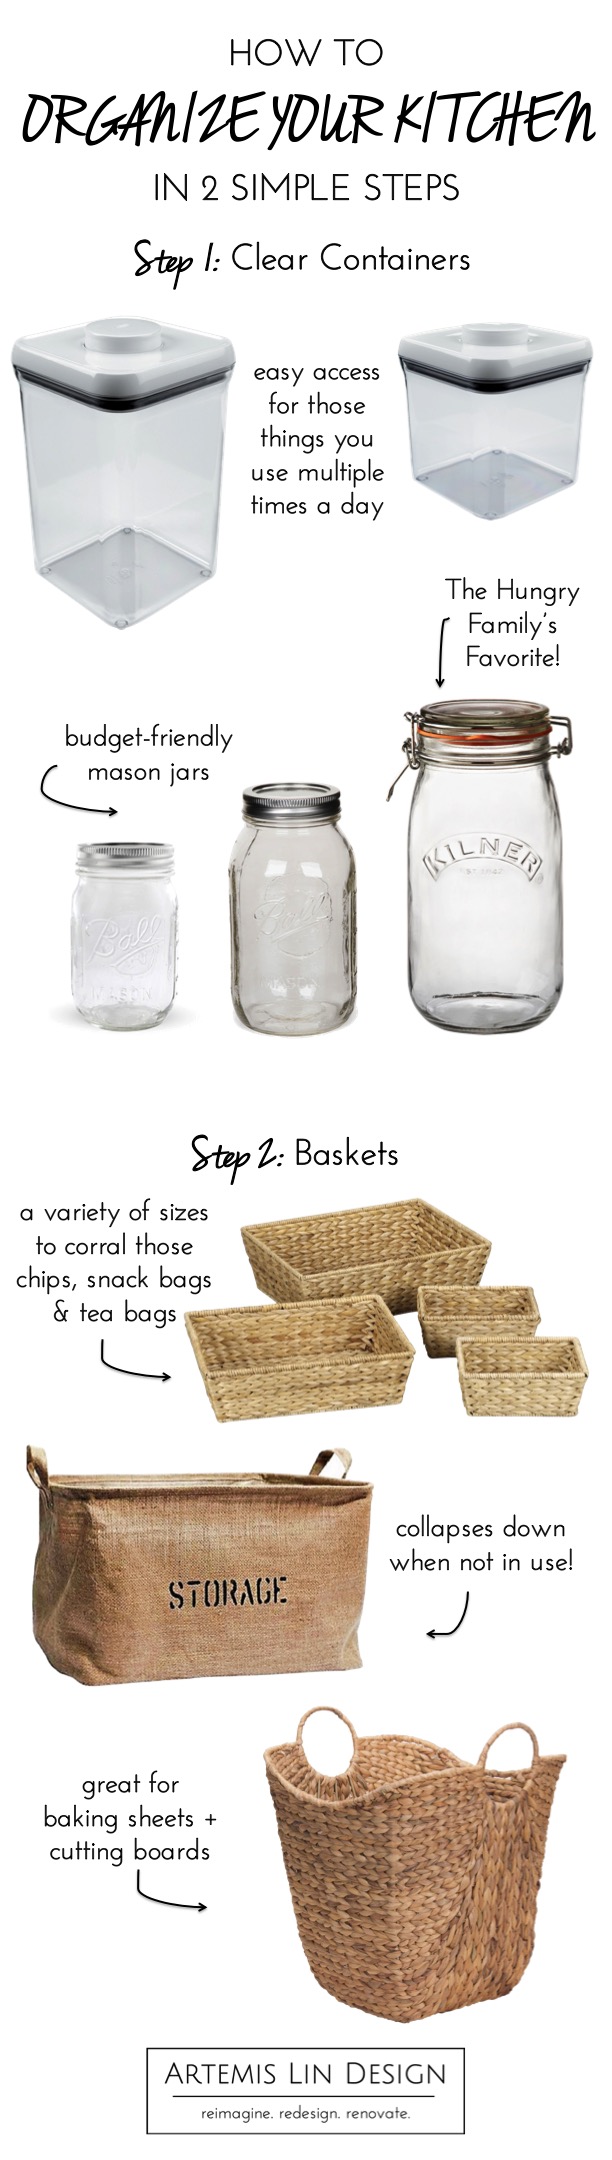 How to Organize A Kitchen In 7 Simple Steps